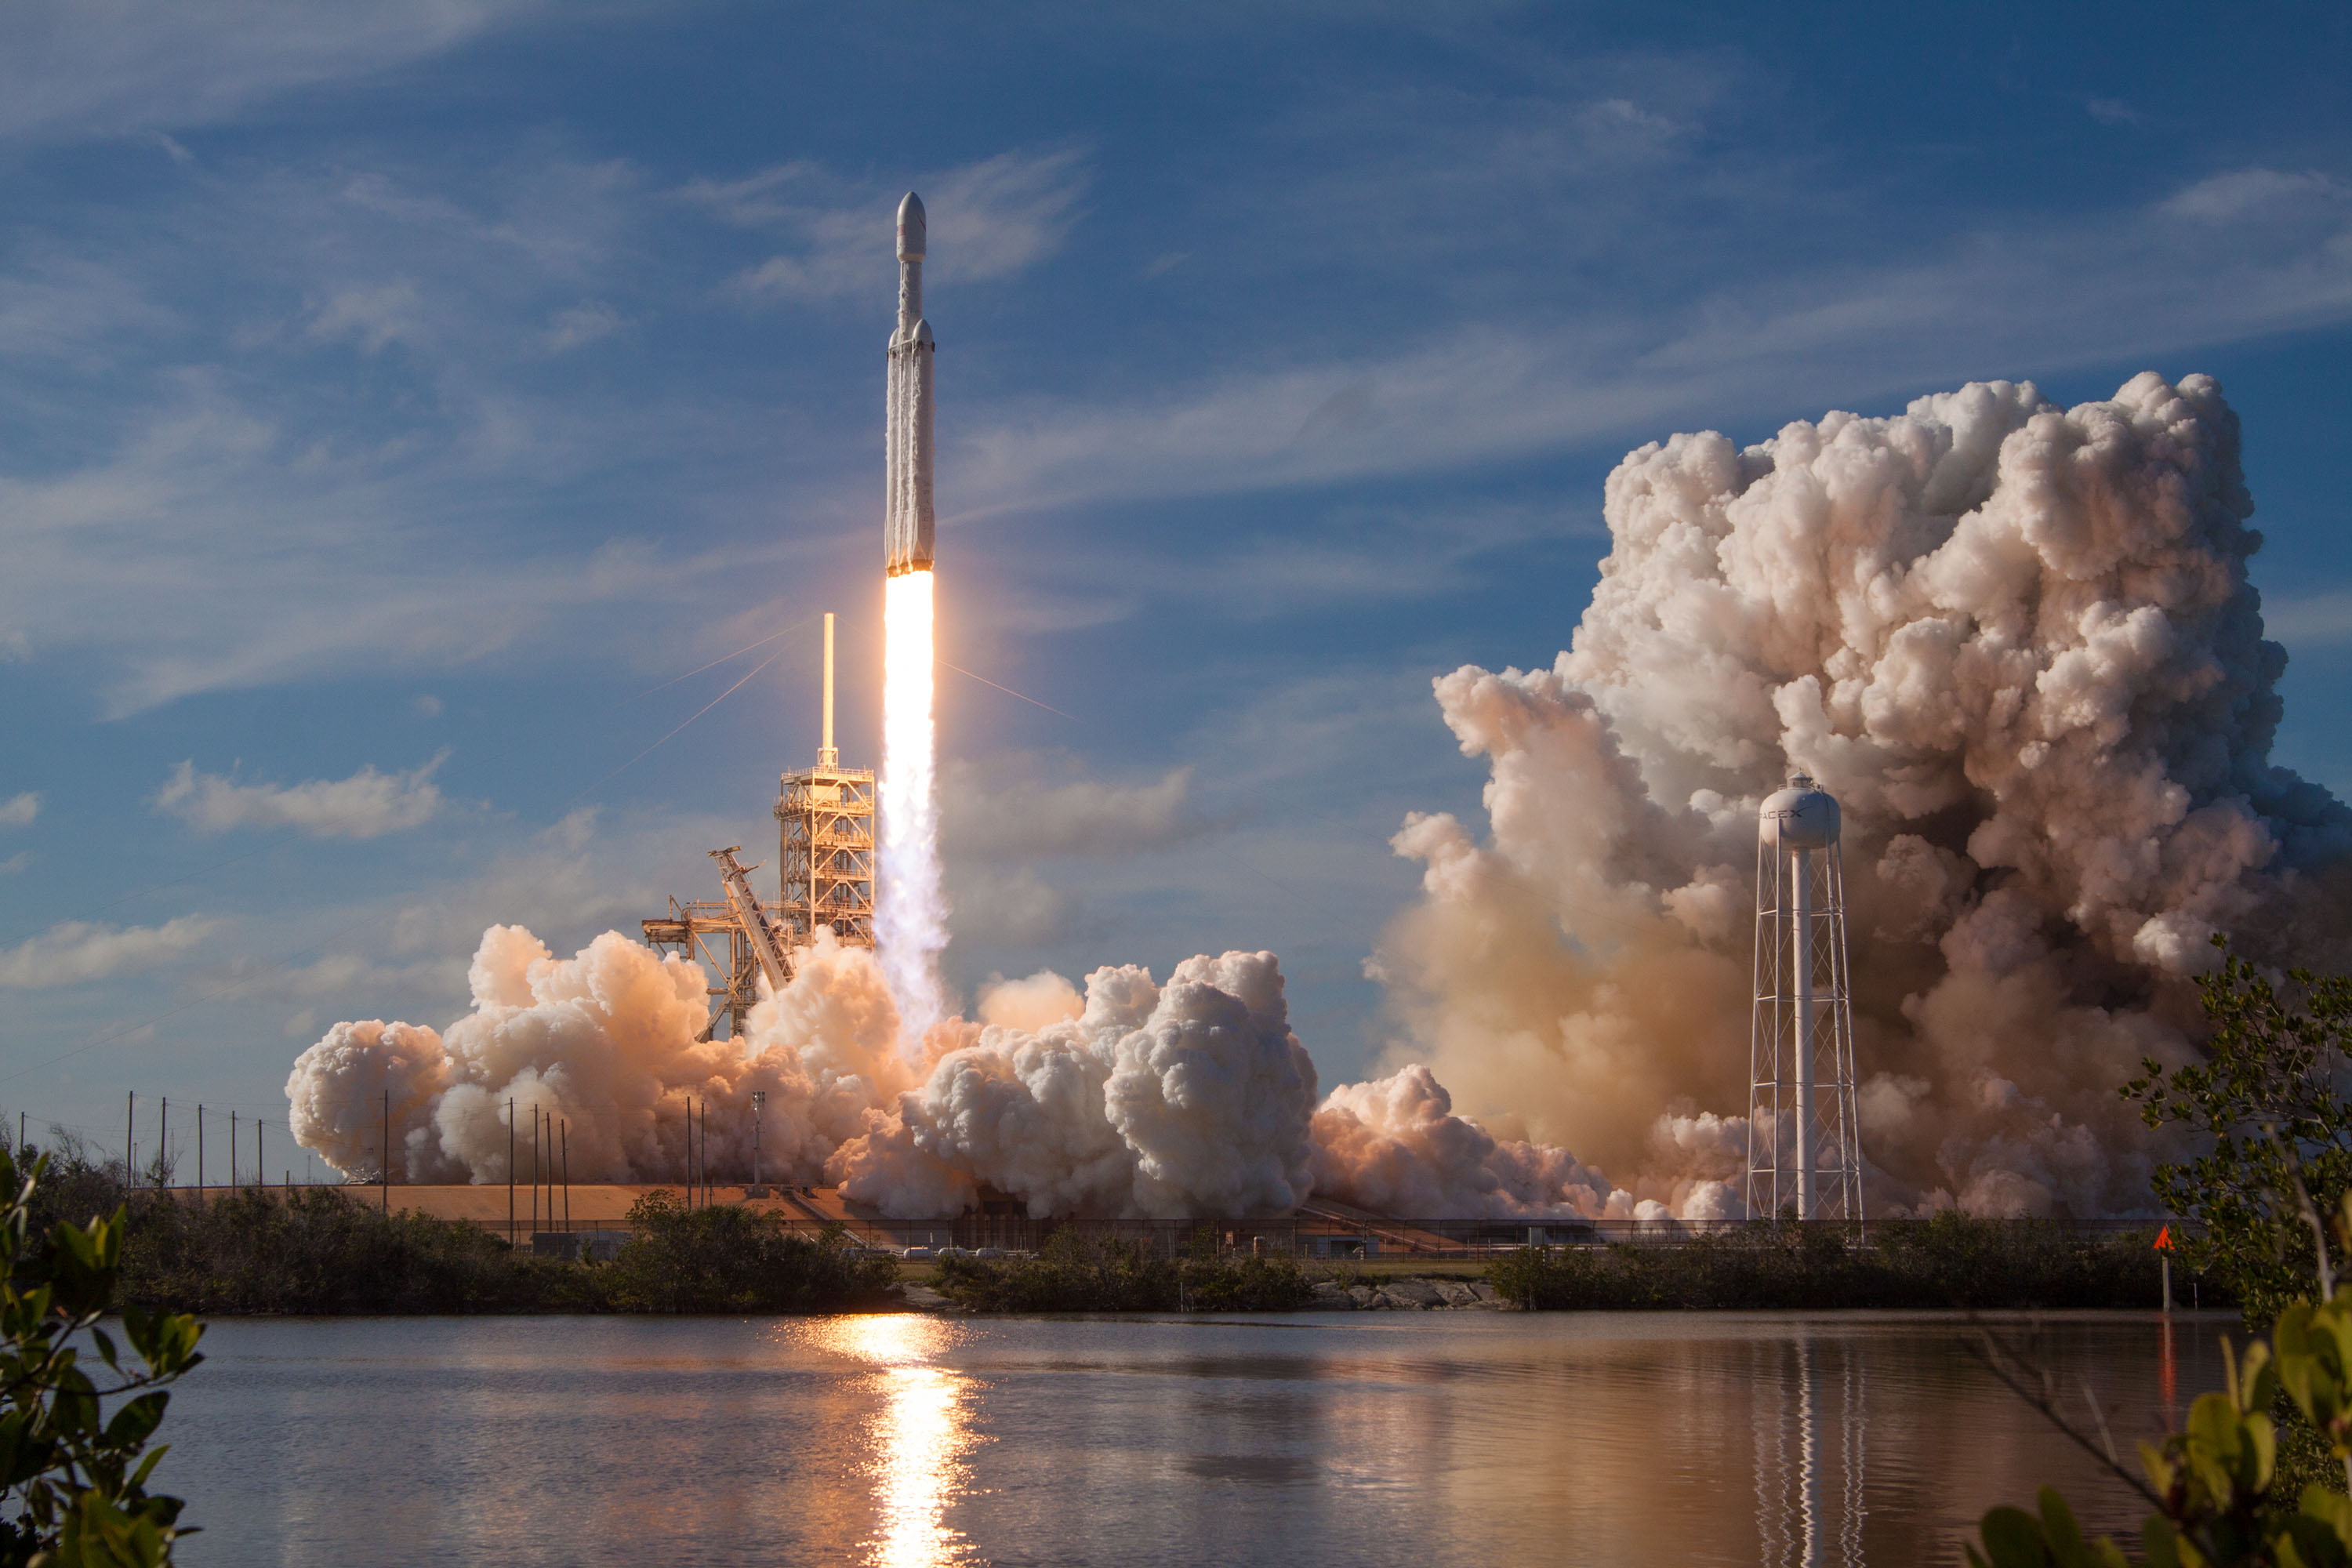 Barry Pilfer adopteren Here's what's next for SpaceX after Falcon Heavy's first flight - The Verge